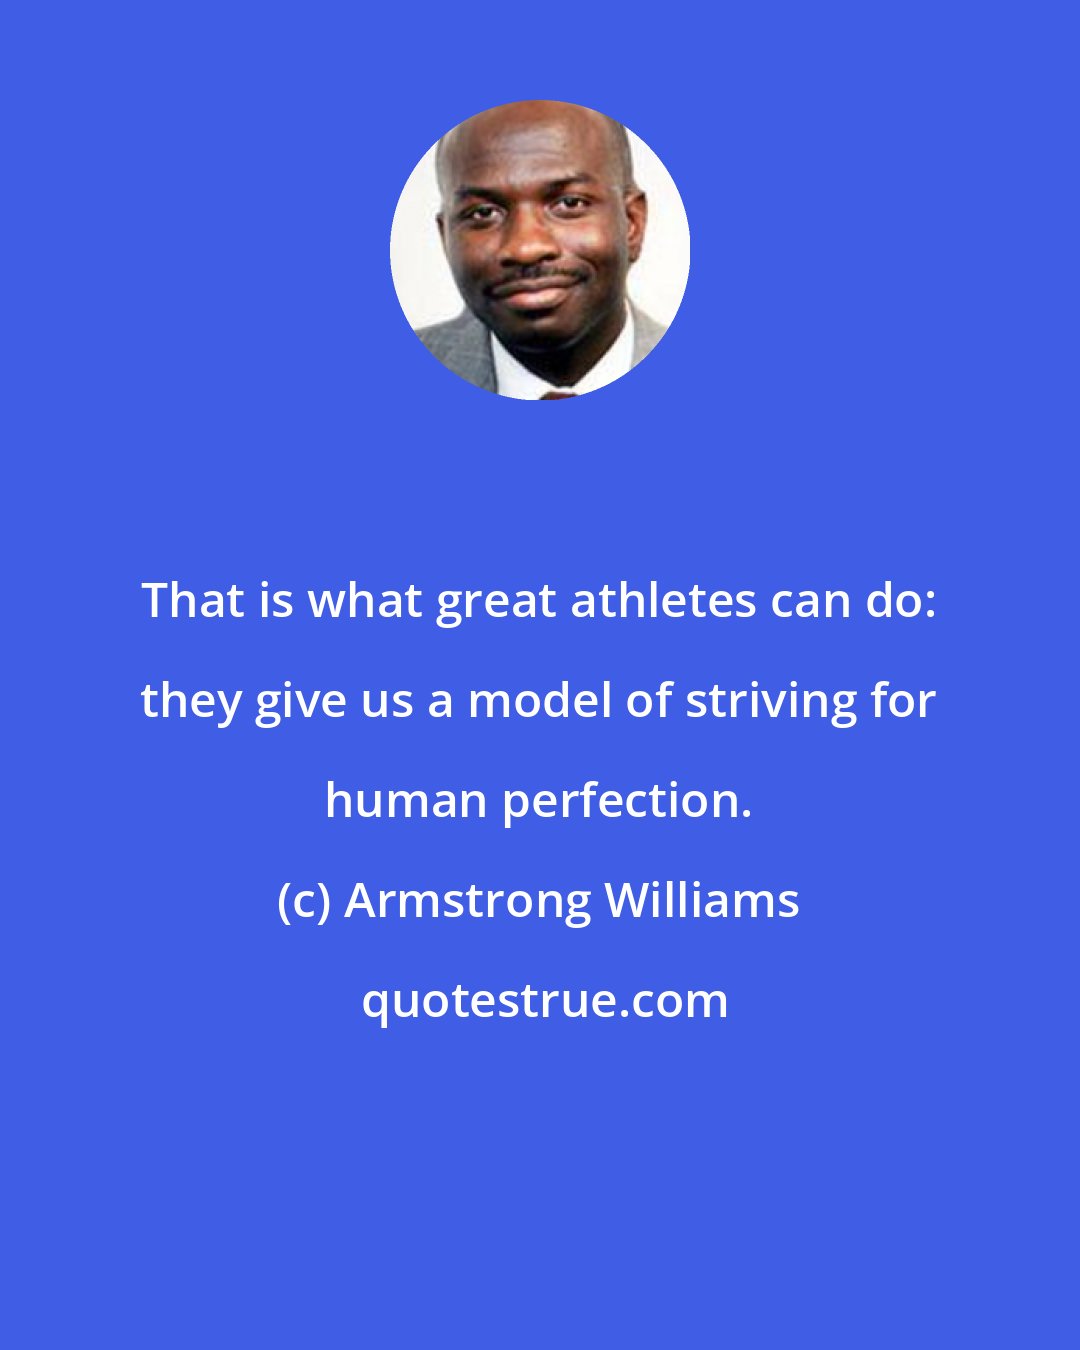 Armstrong Williams: That is what great athletes can do: they give us a model of striving for human perfection.